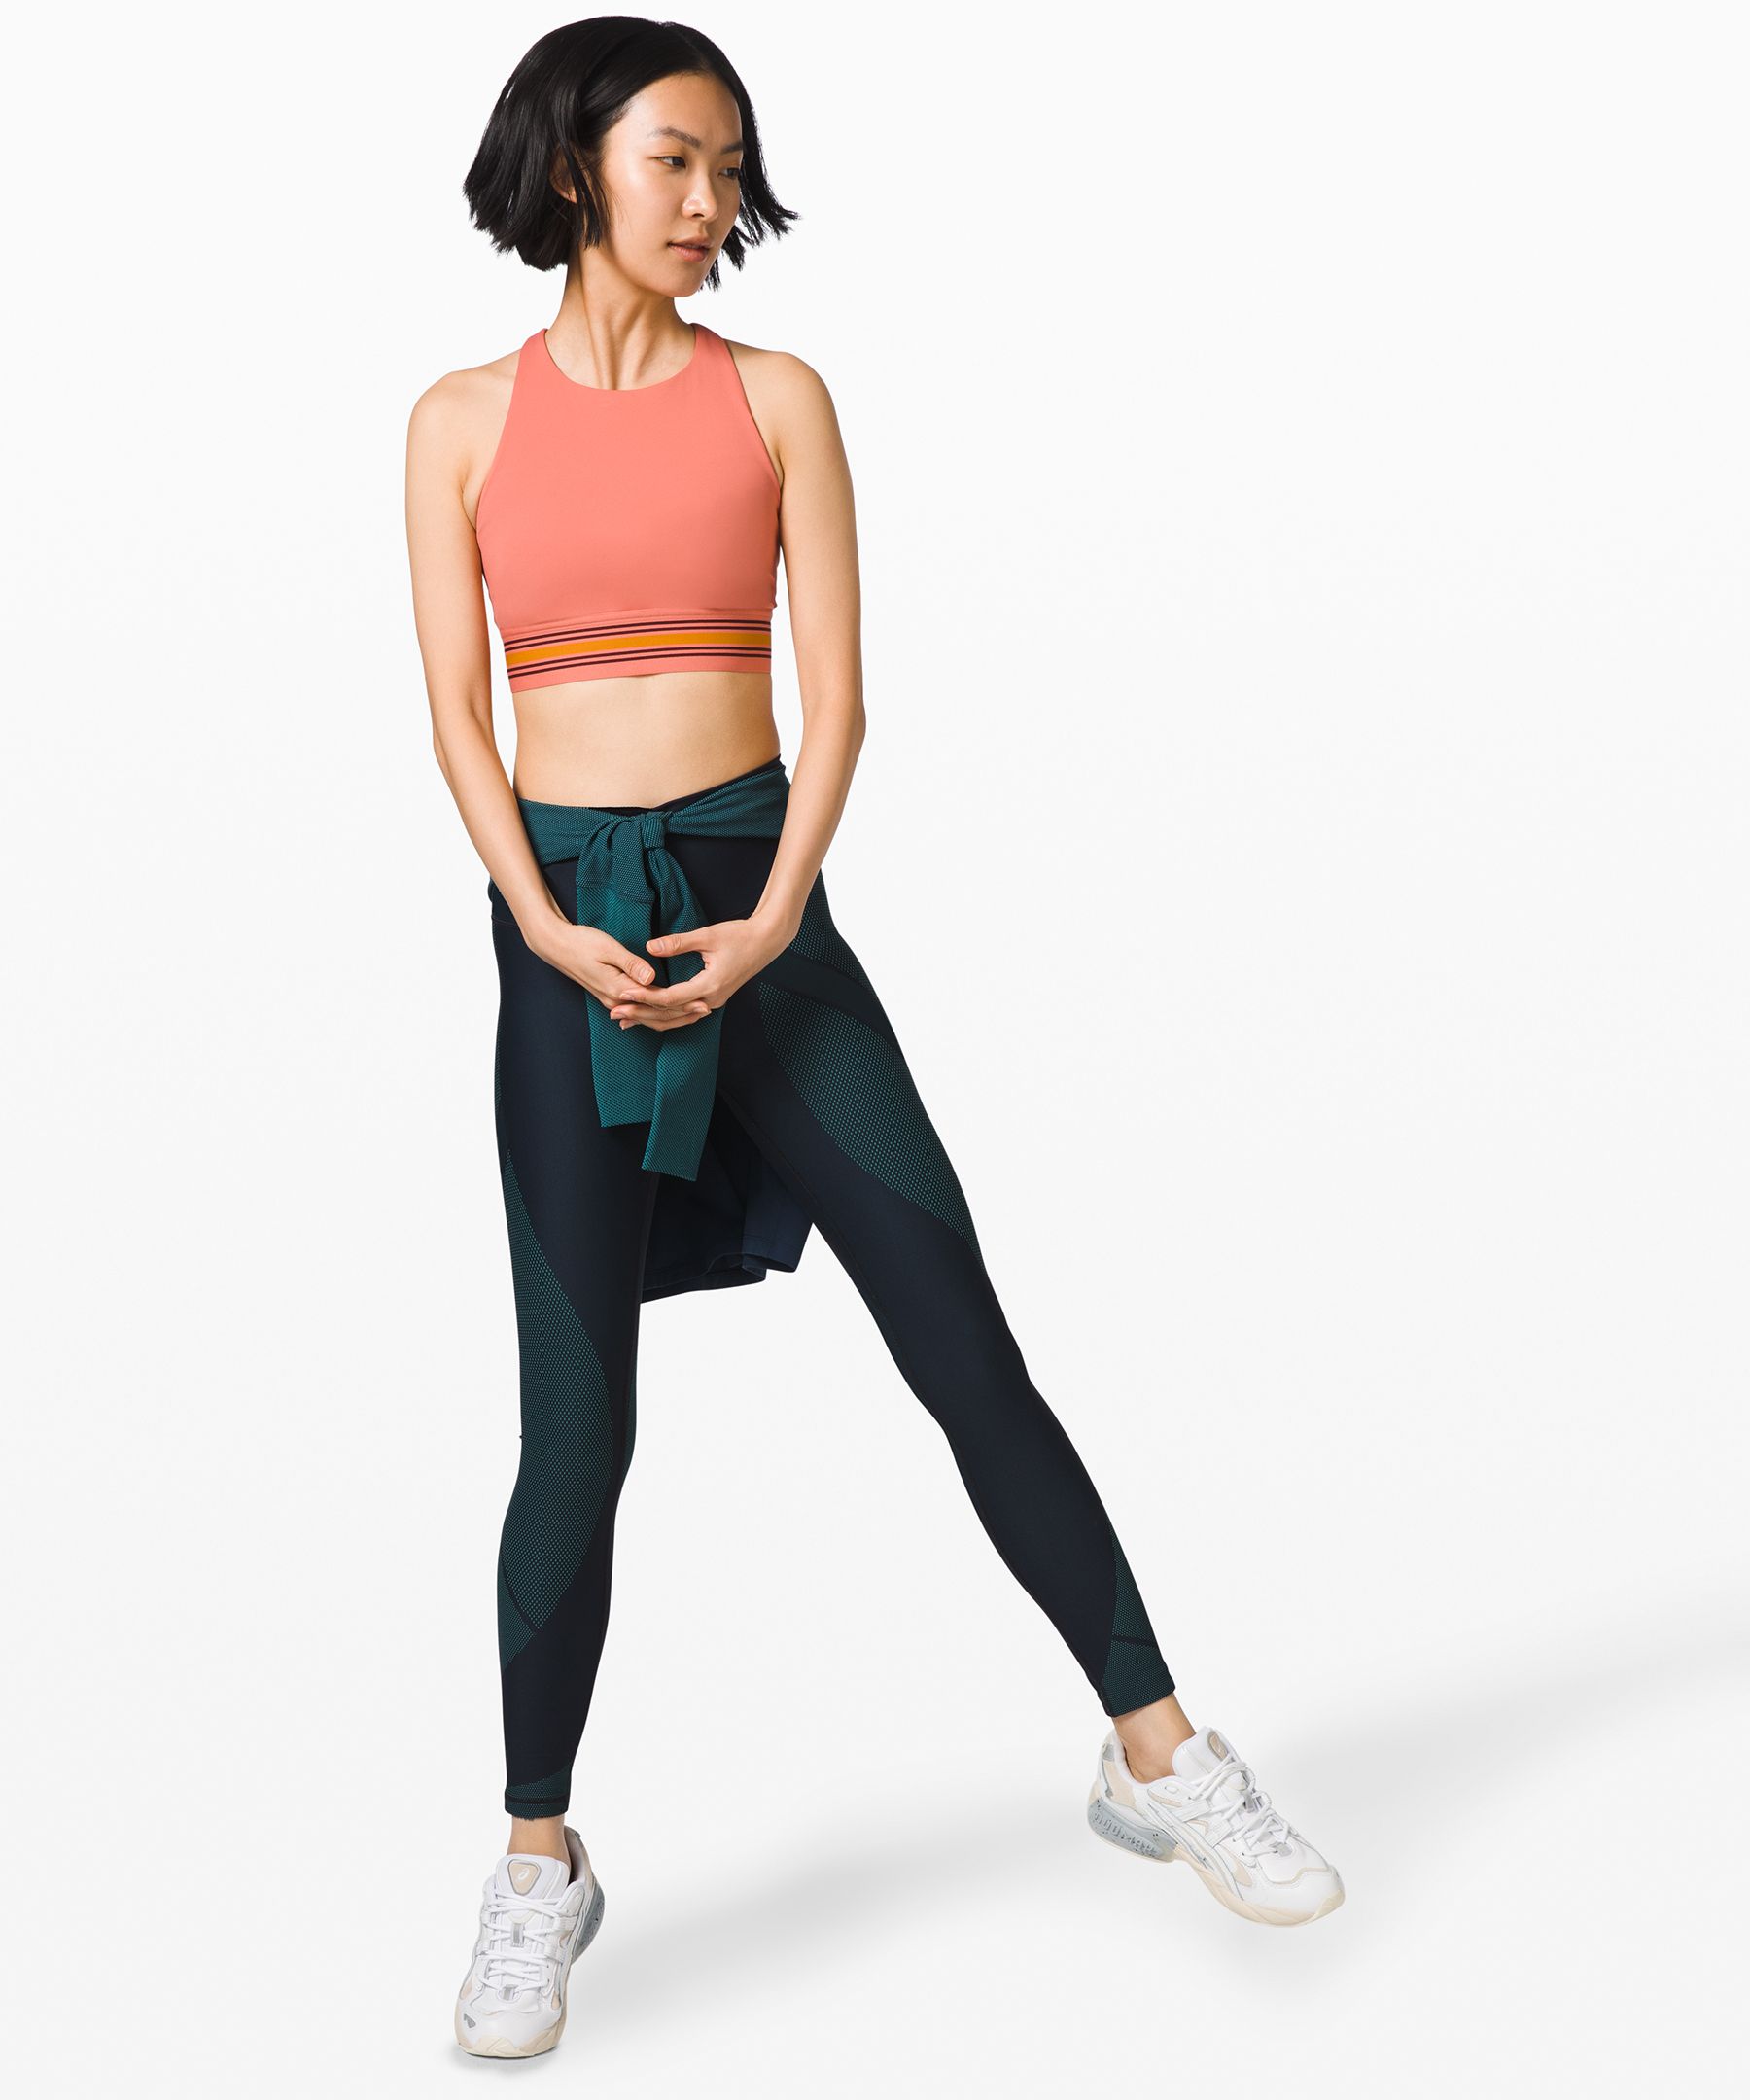 personal trainer discount lululemon